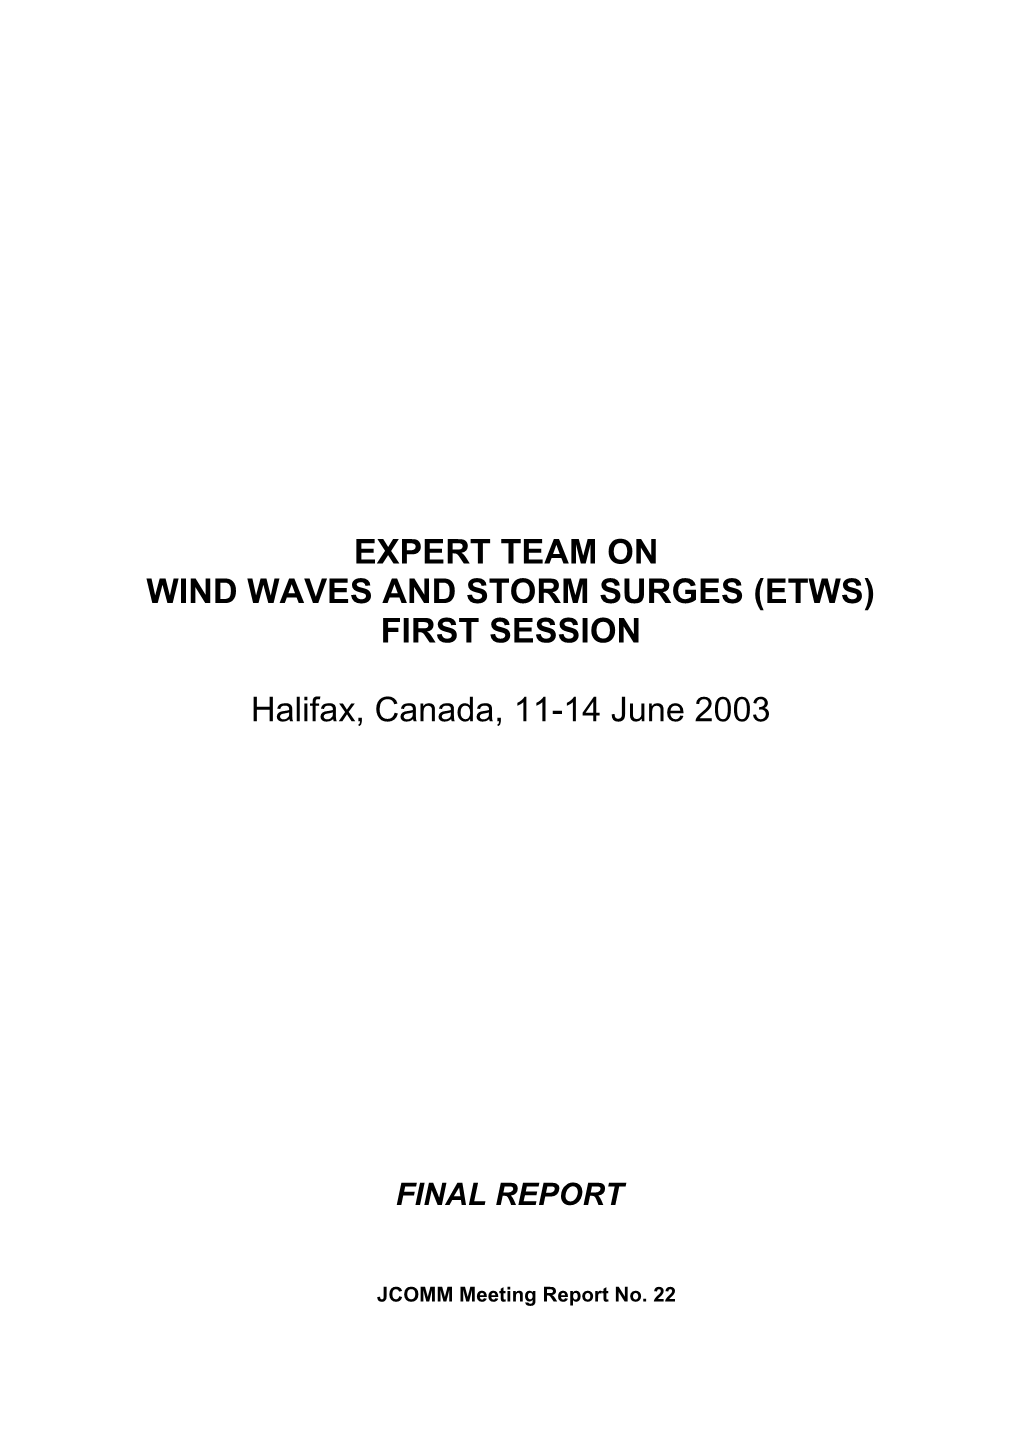 Wind Waves and Storm Surges (Etws)